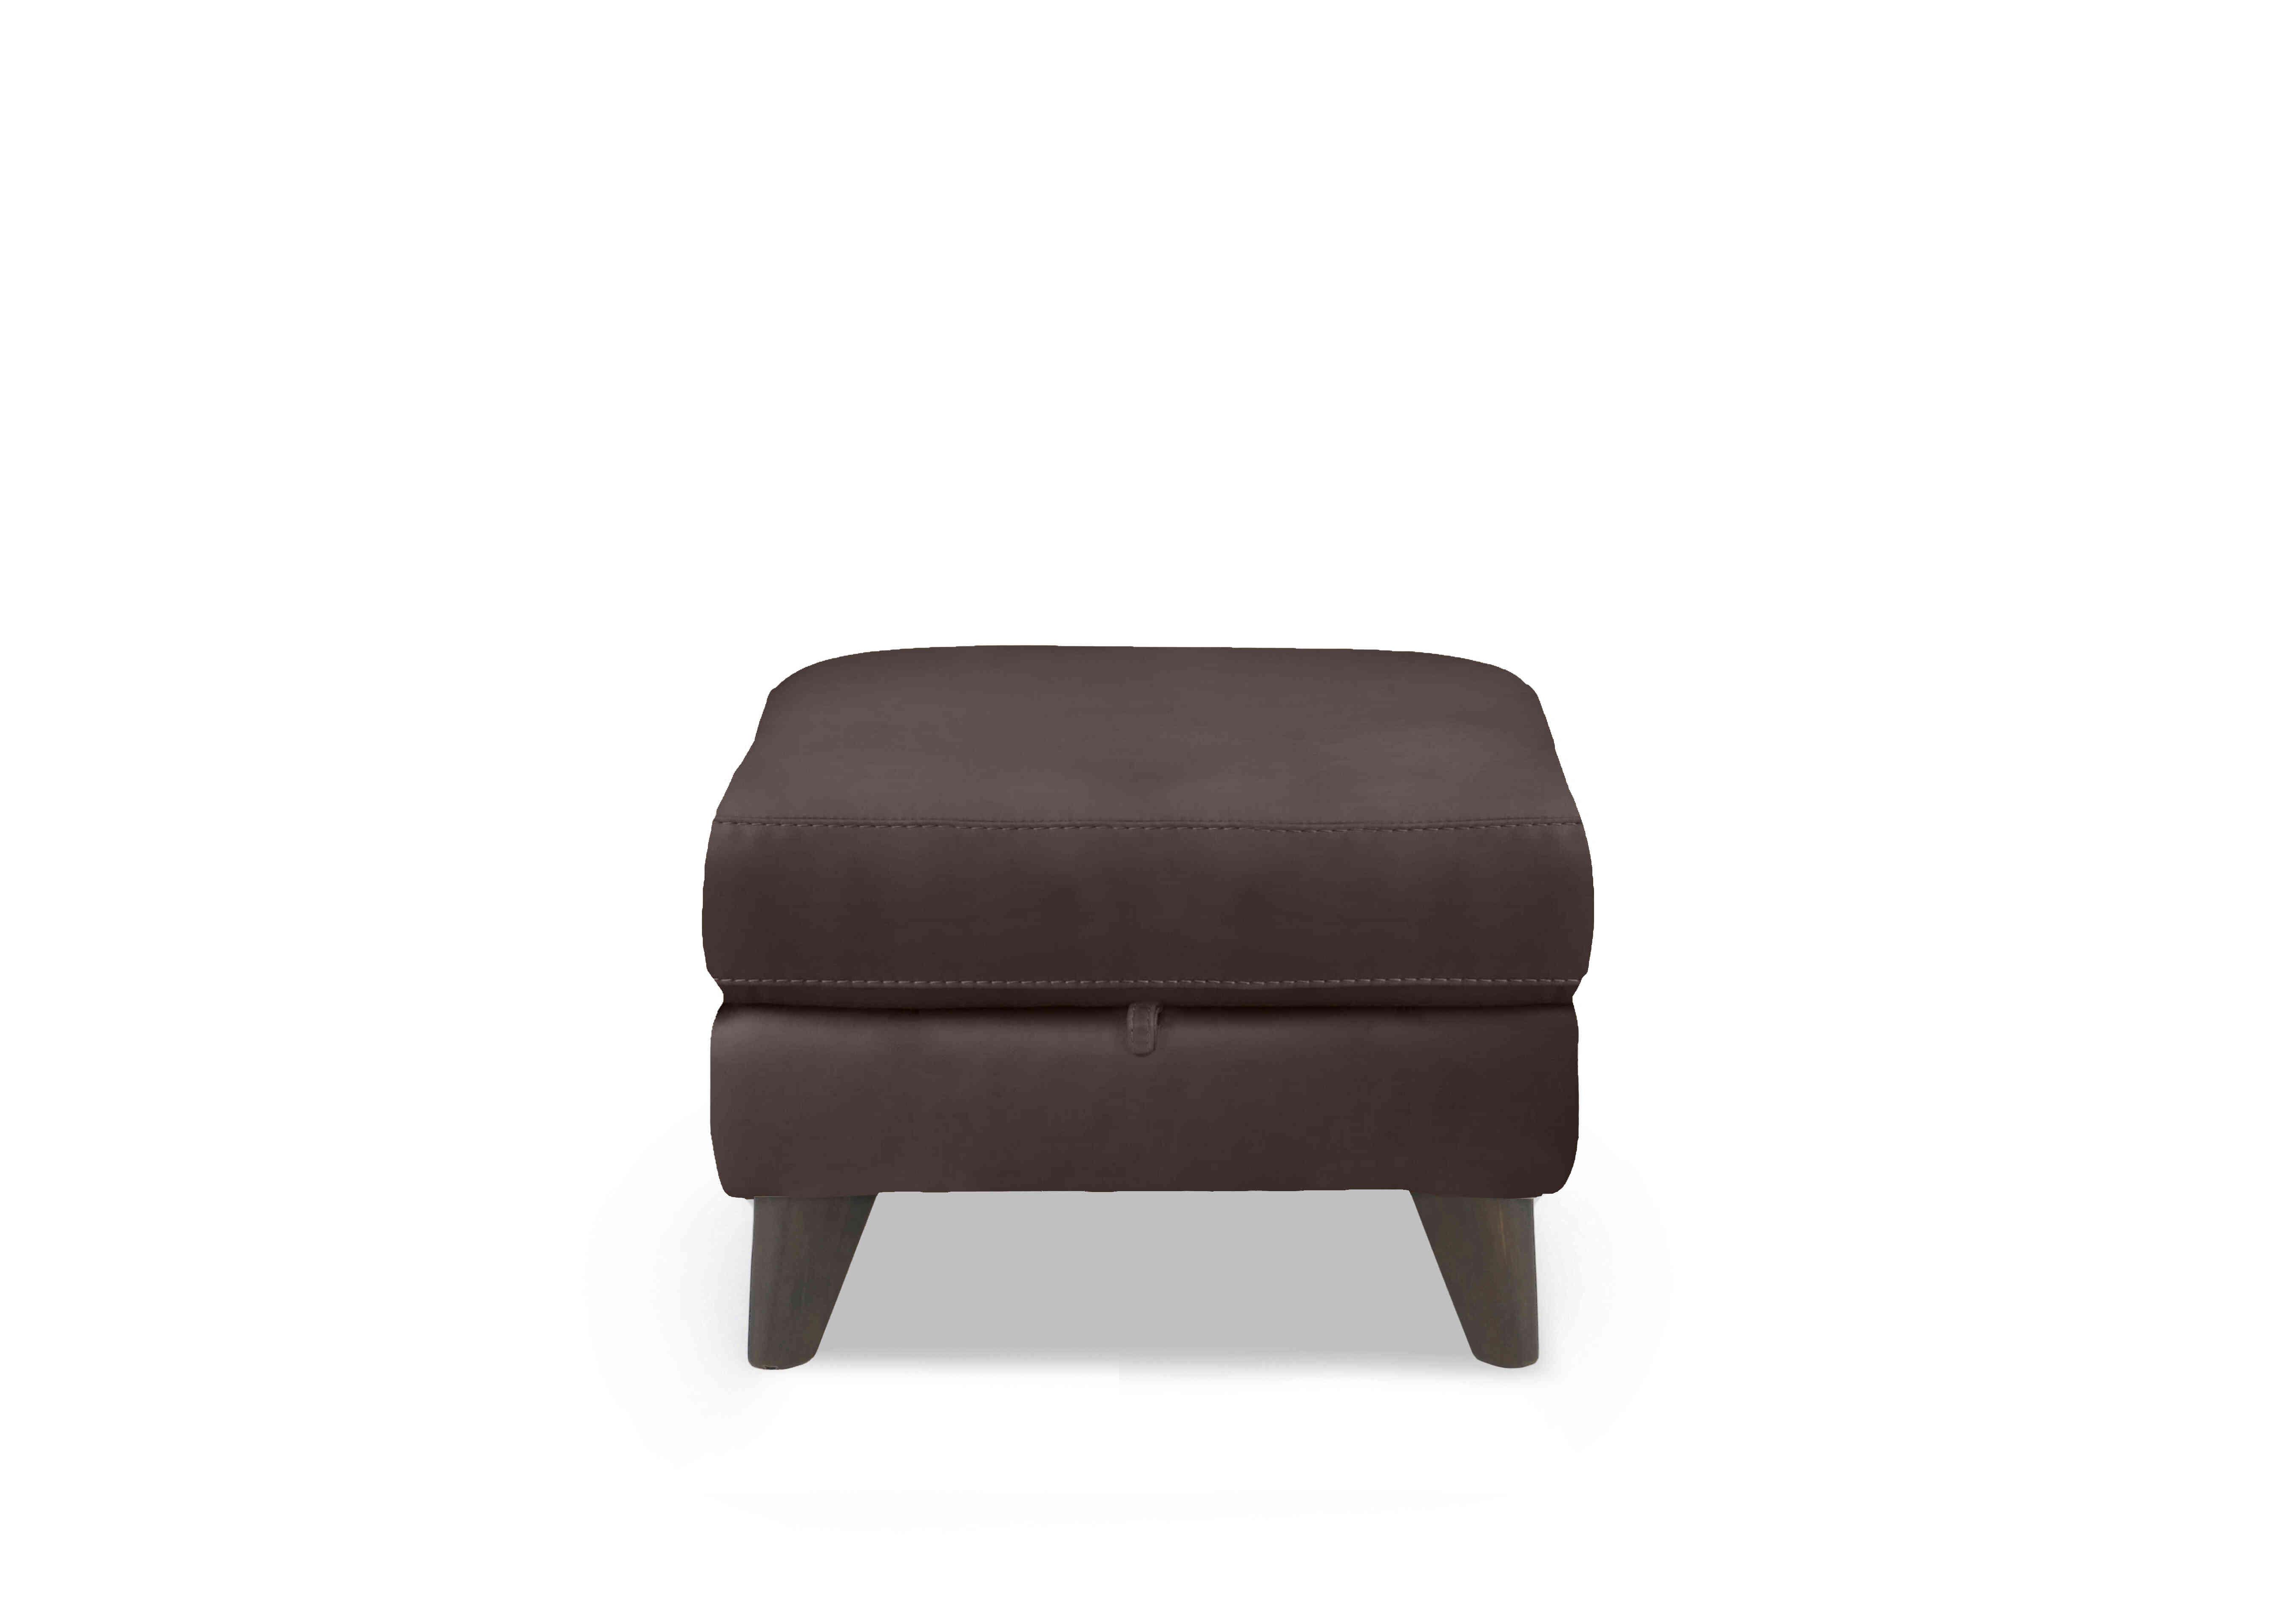 Wade Leather Storage Footstool in Nw-512e Cacao on Furniture Village